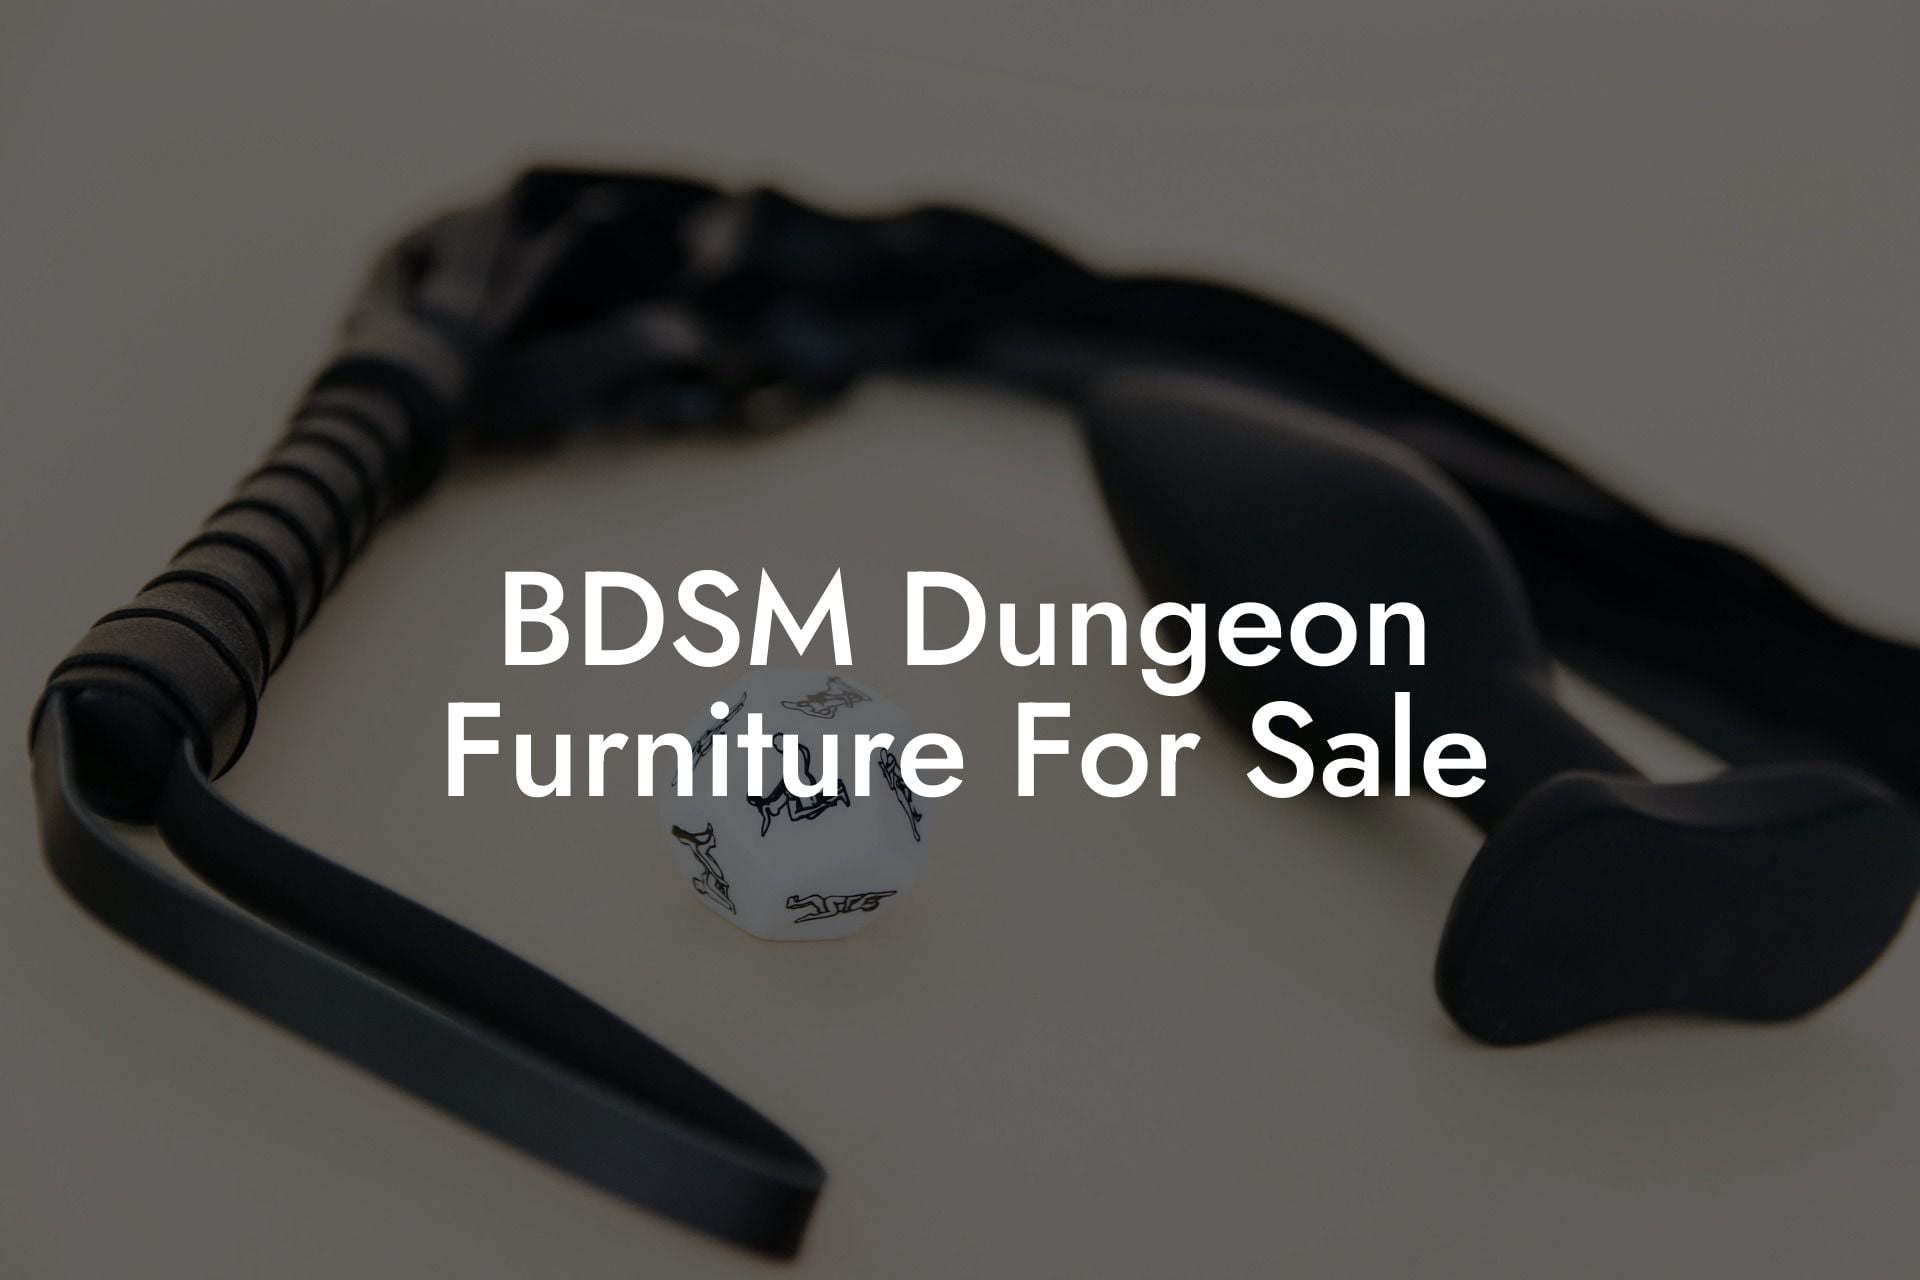 BDSM Dungeon Furniture For Sale